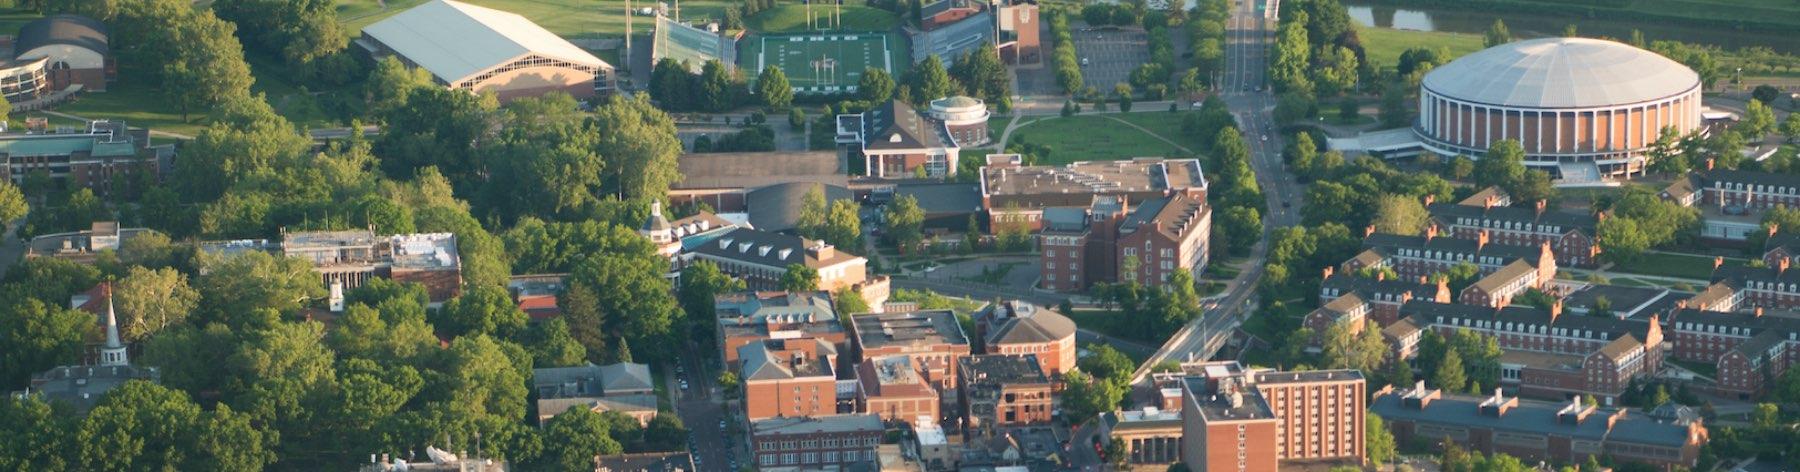 Aerial view of Athens Campus